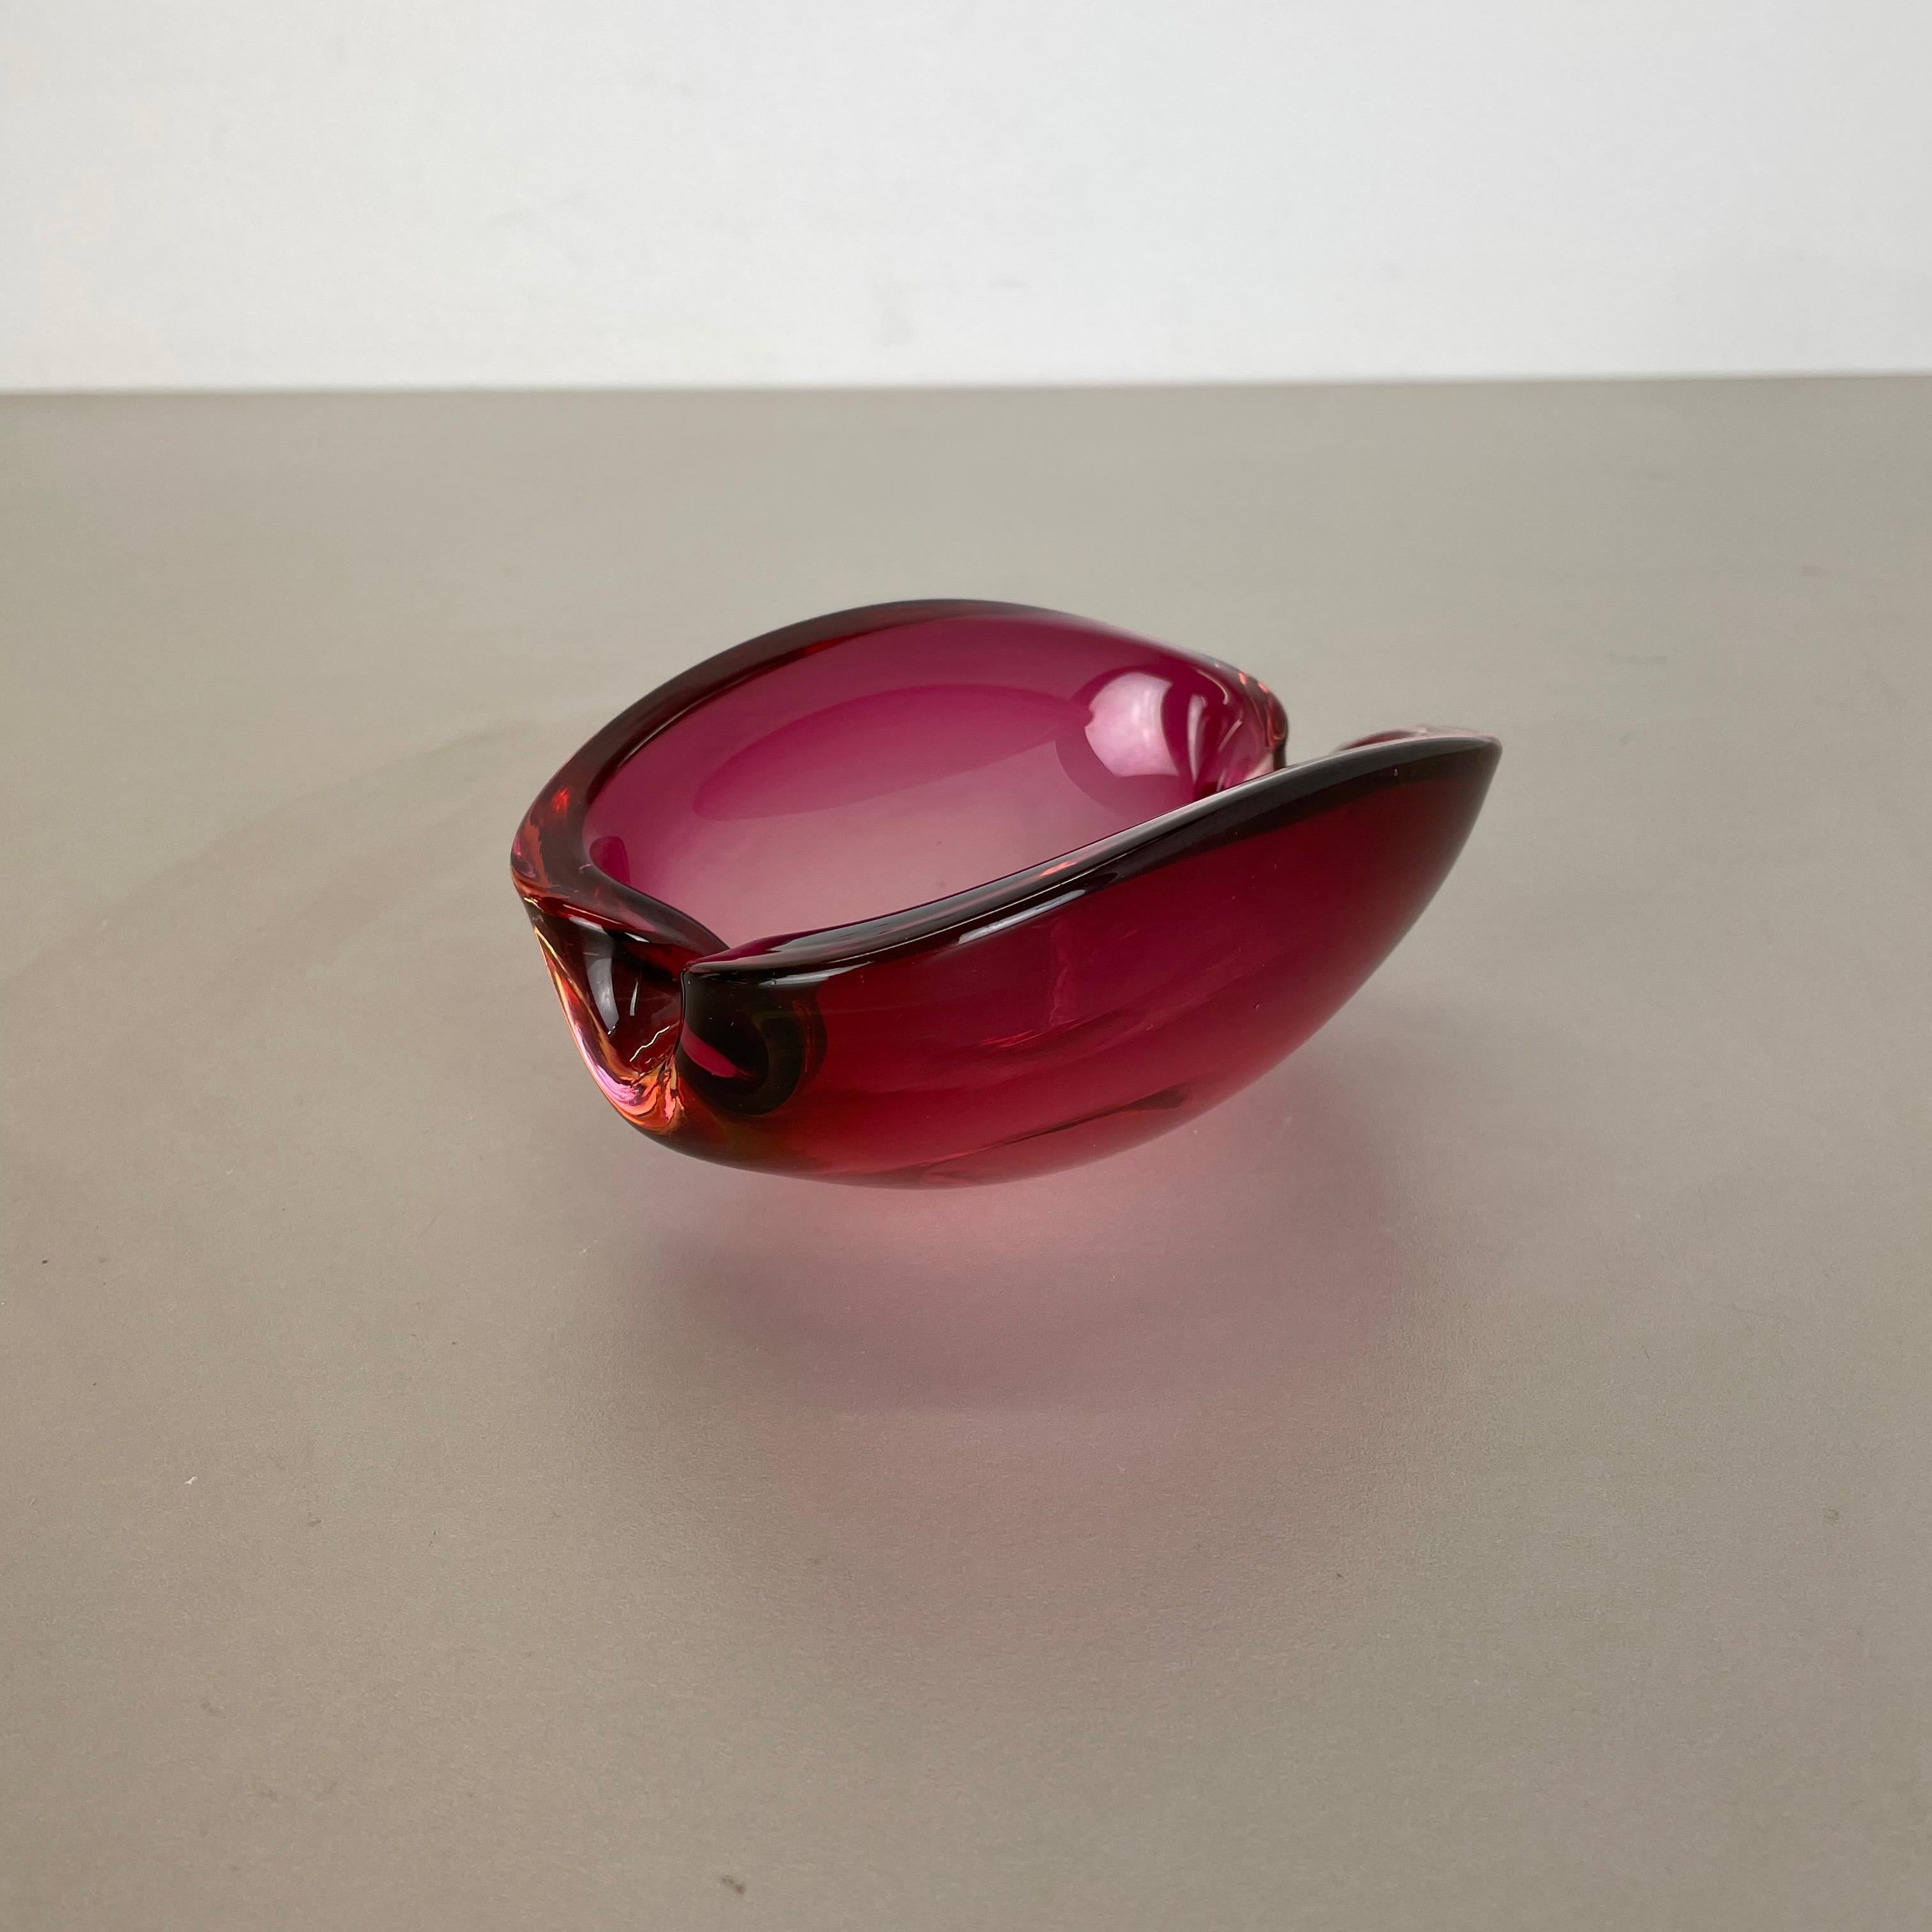 Article:

Murano glass bowl, ashtray element


Origin:

Murano, Italy


Decade:

1970s



This original vintage glass bowl element, ash tray was produced in the 1970s in Murano, Italy. It is made of solid haevy glass and has a